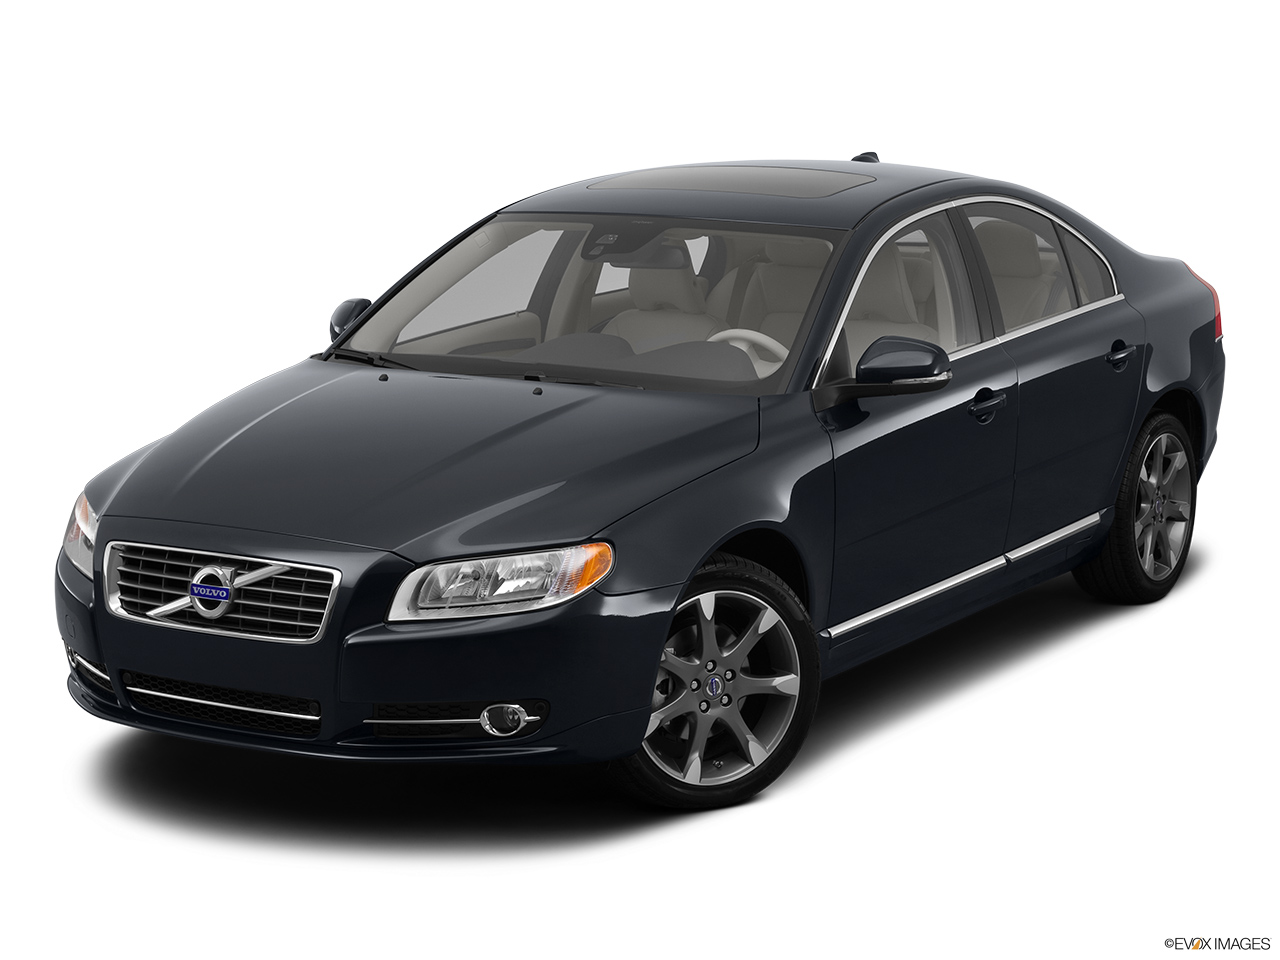 2012 Volvo S80 3.2 Front angle view. 